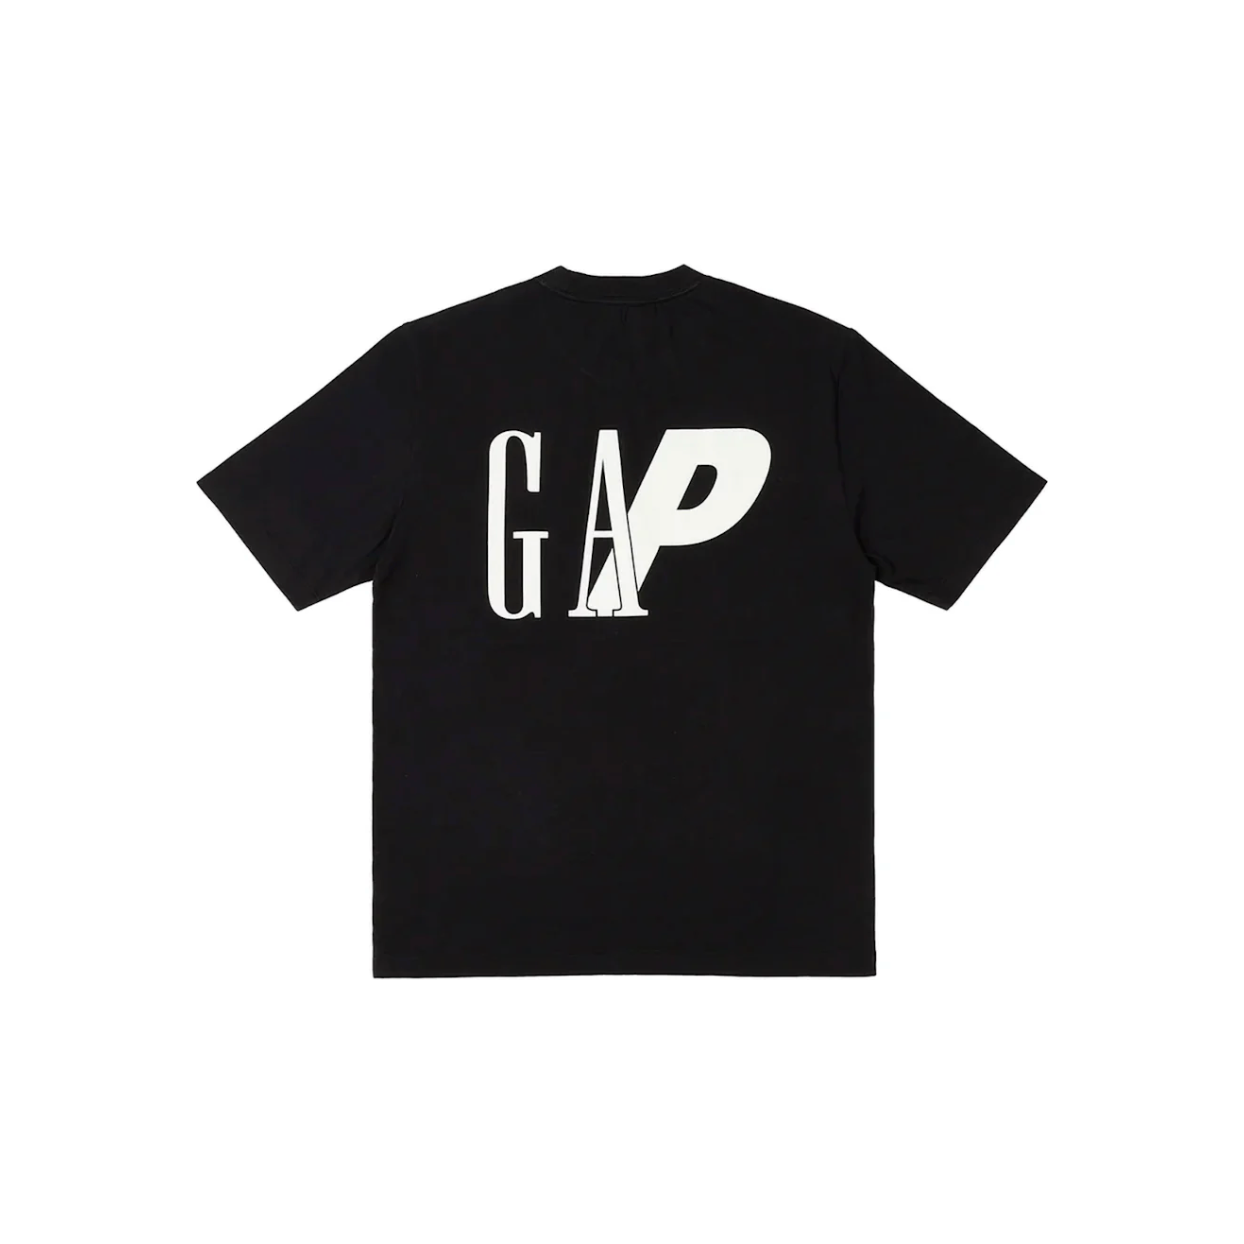 Palace x Gap T-Shirt Black by Palace from £80.00